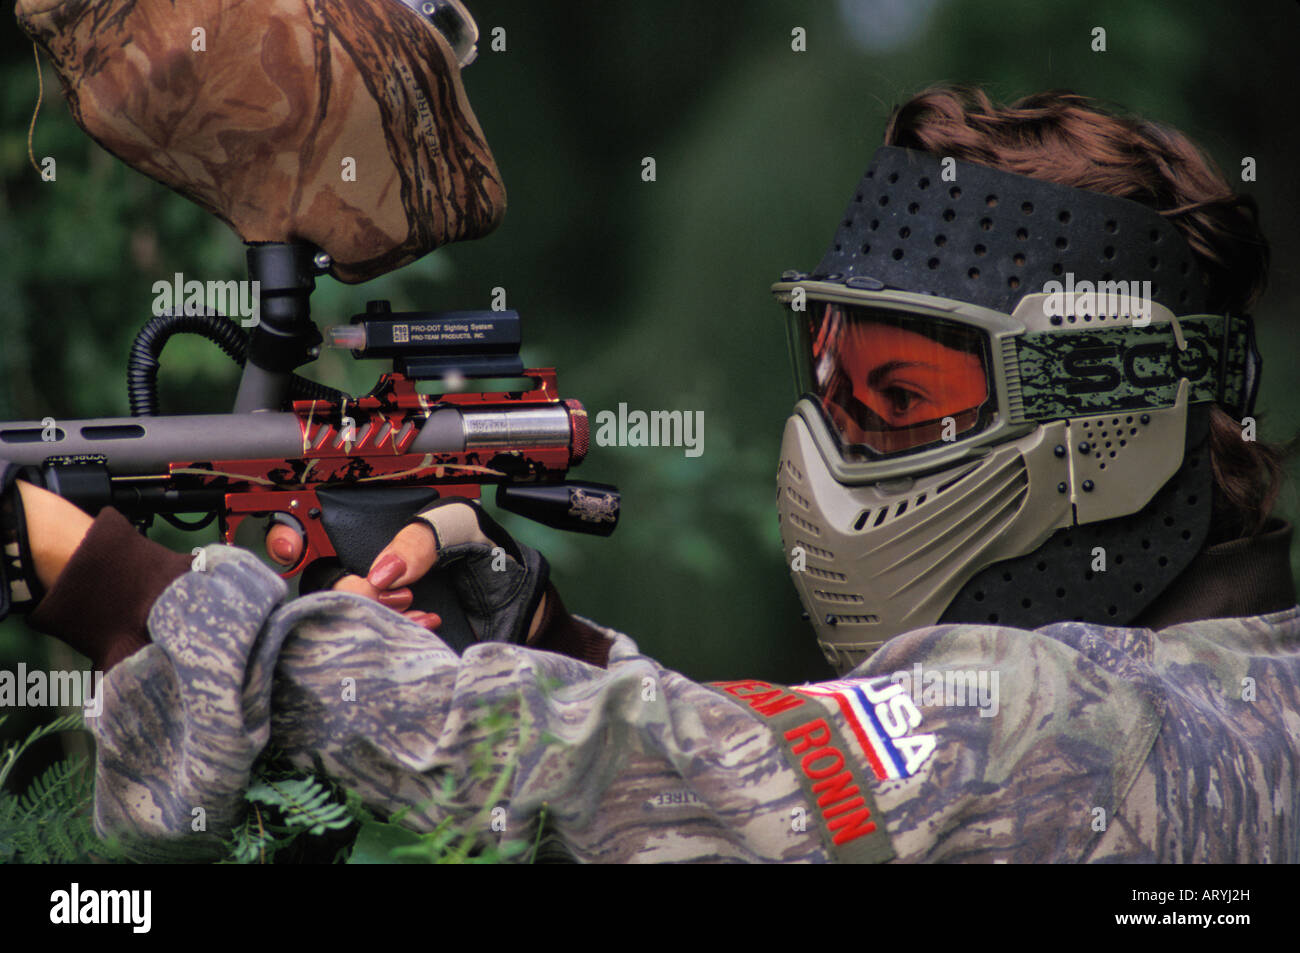 Woman engaged in paintball sport, a paramilitary leisure type game, Kualoa Ranch Stock Photo